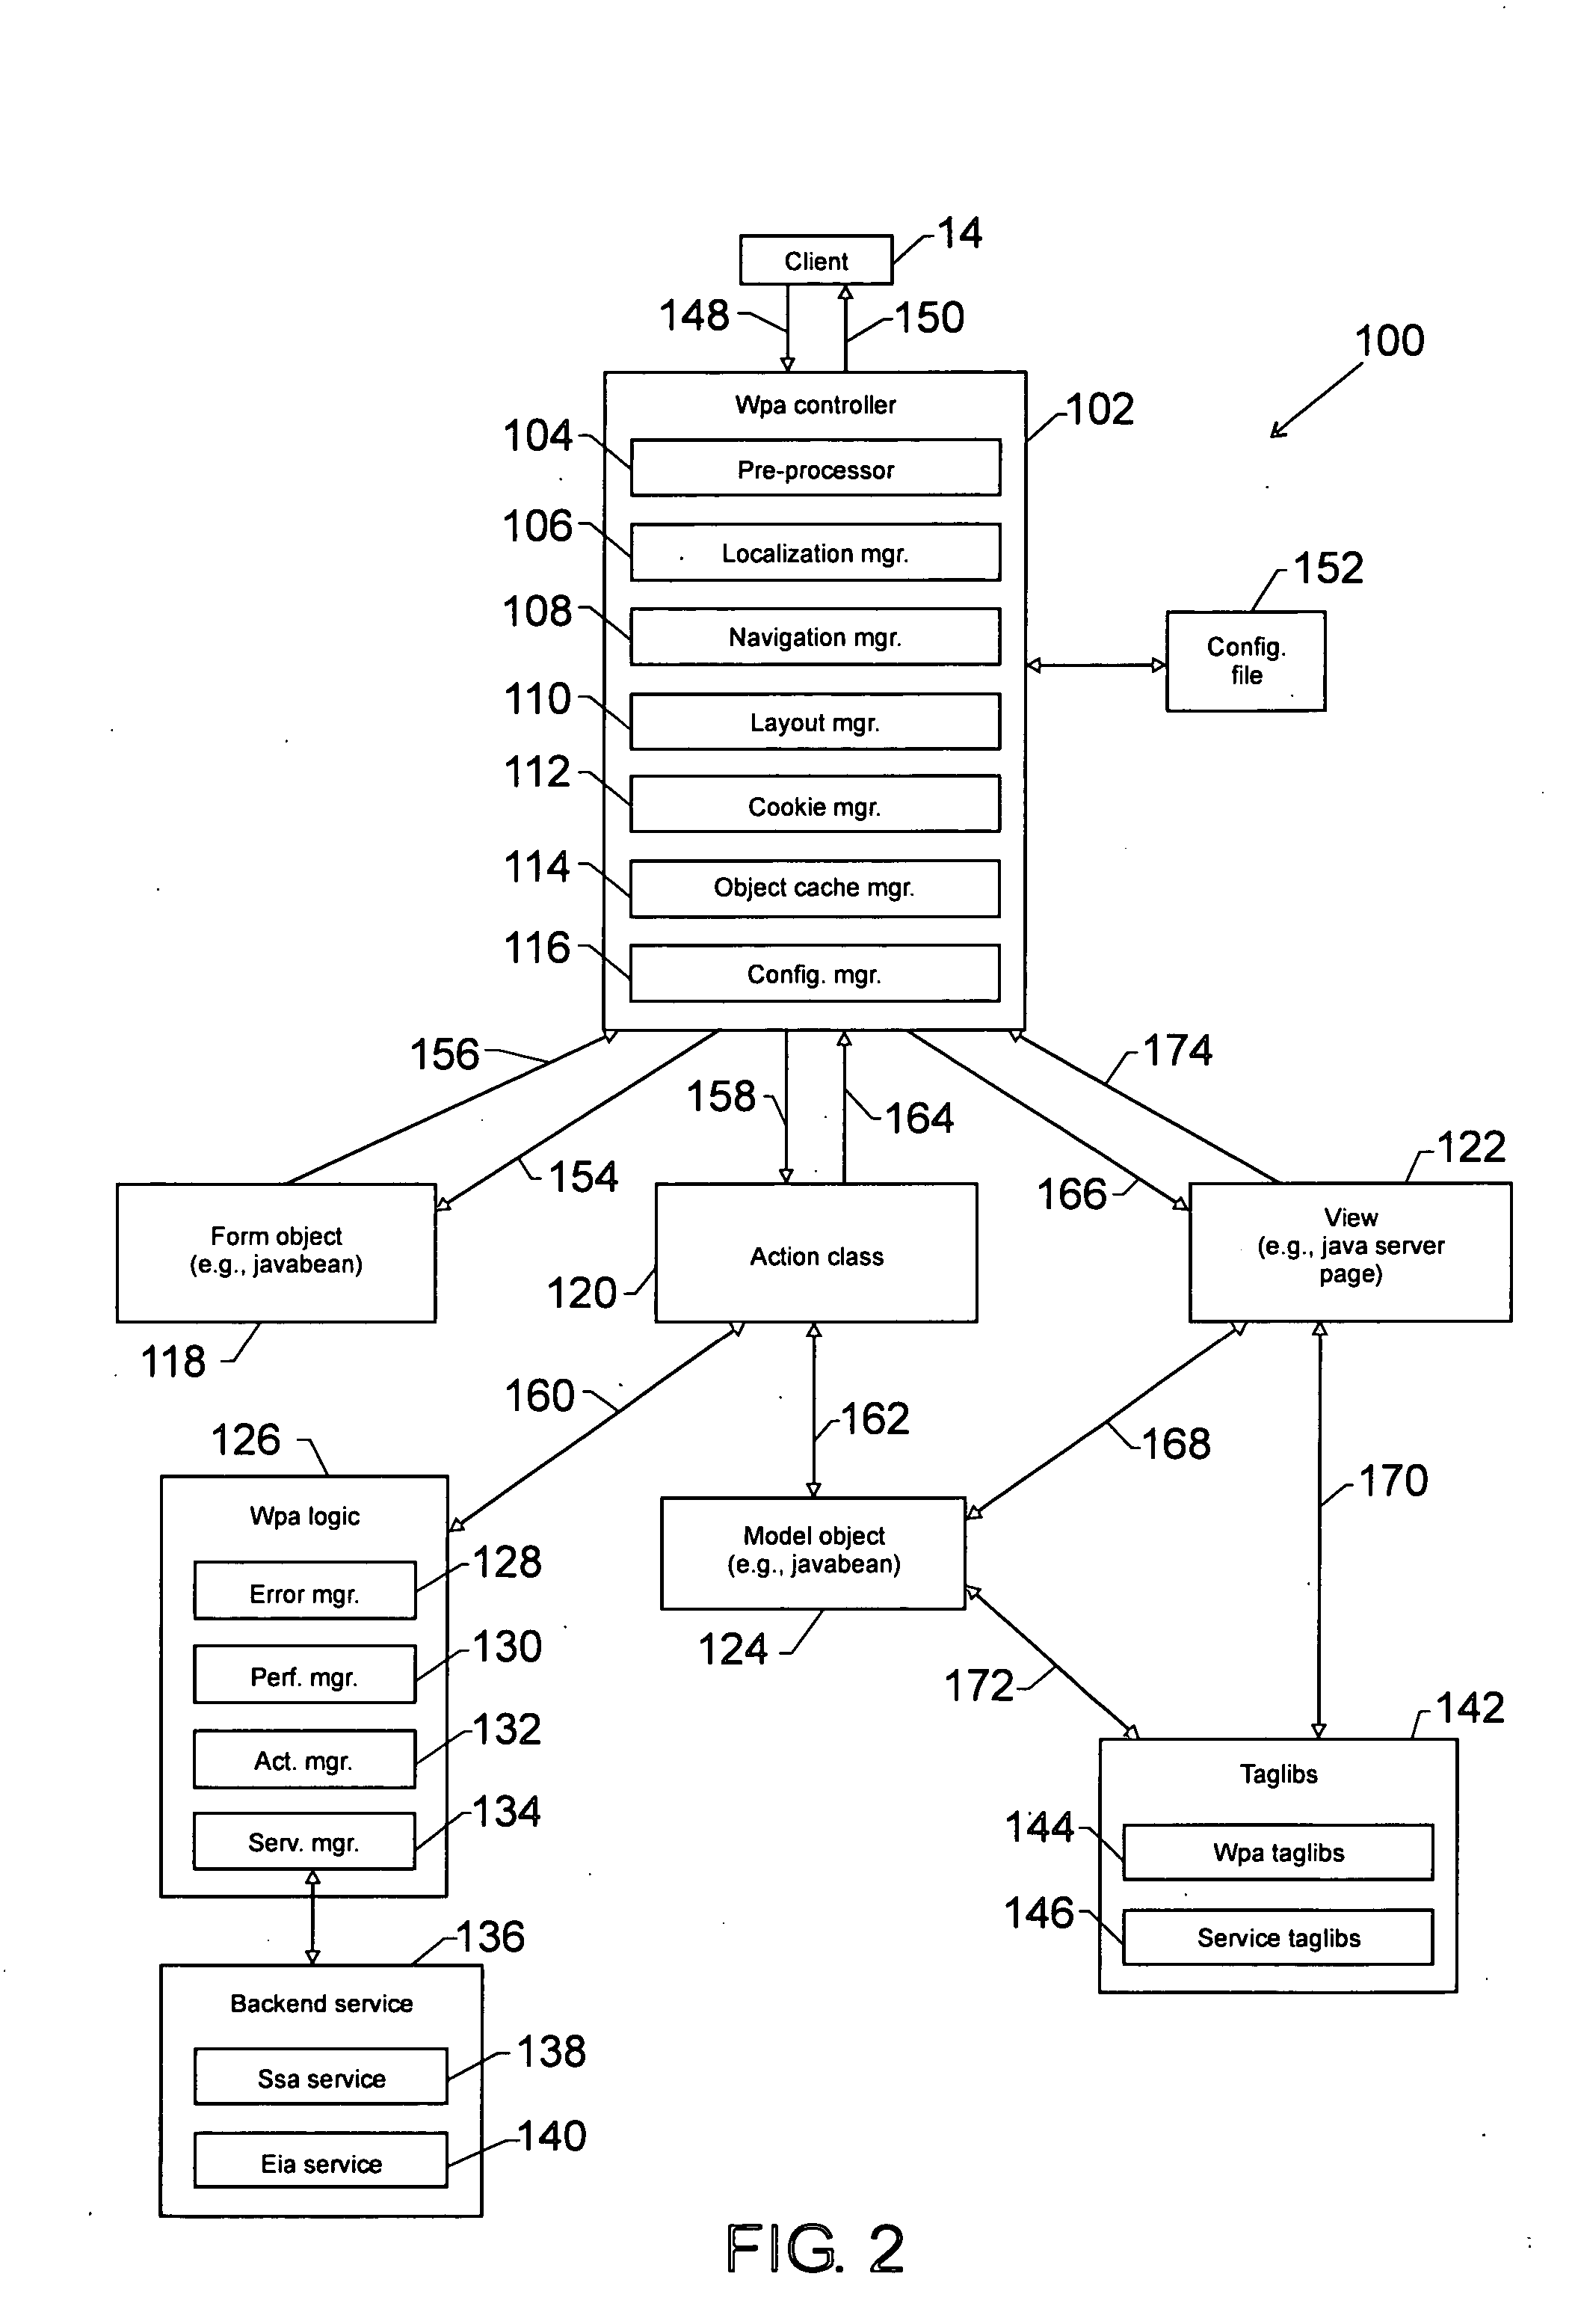 Method and apparatus for supporting layout management in a web presentation architecture